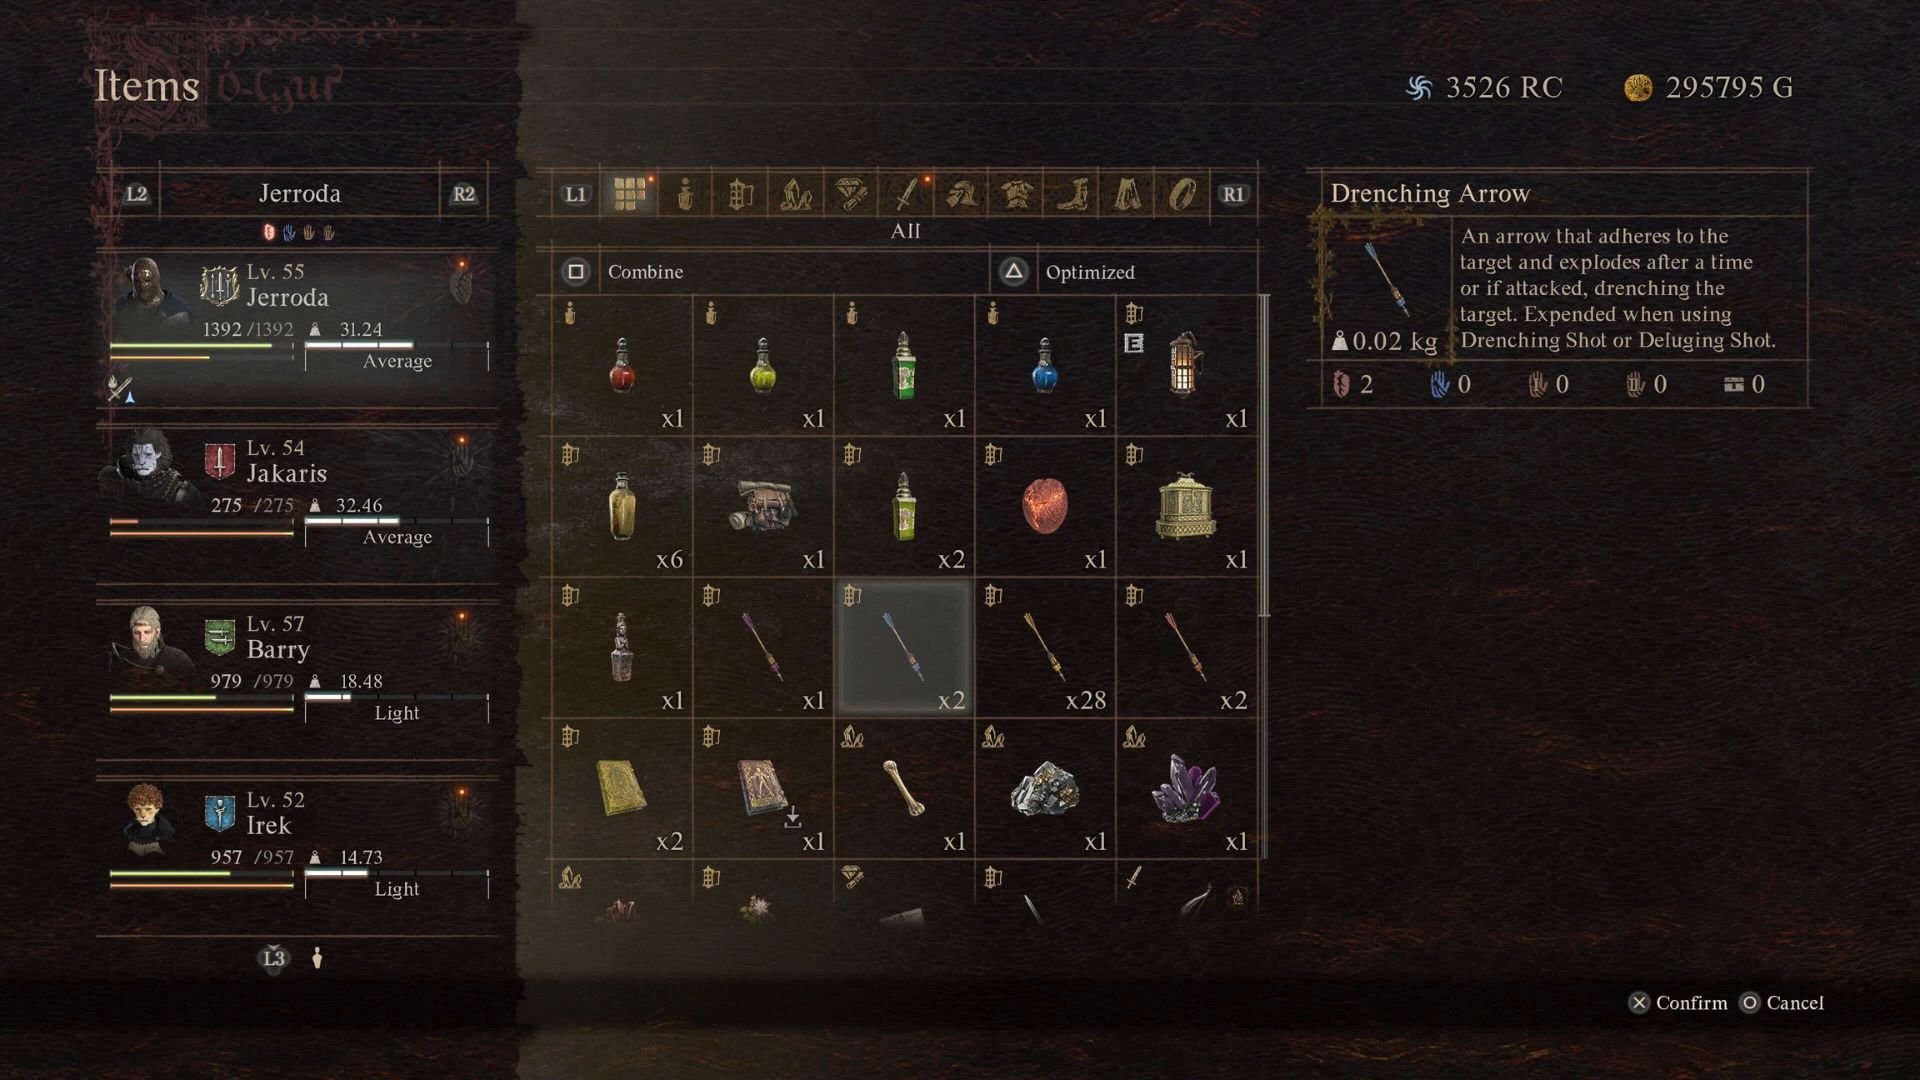 The Drenching Arrow as shown in the Dragon's Dogma 2 Items menu